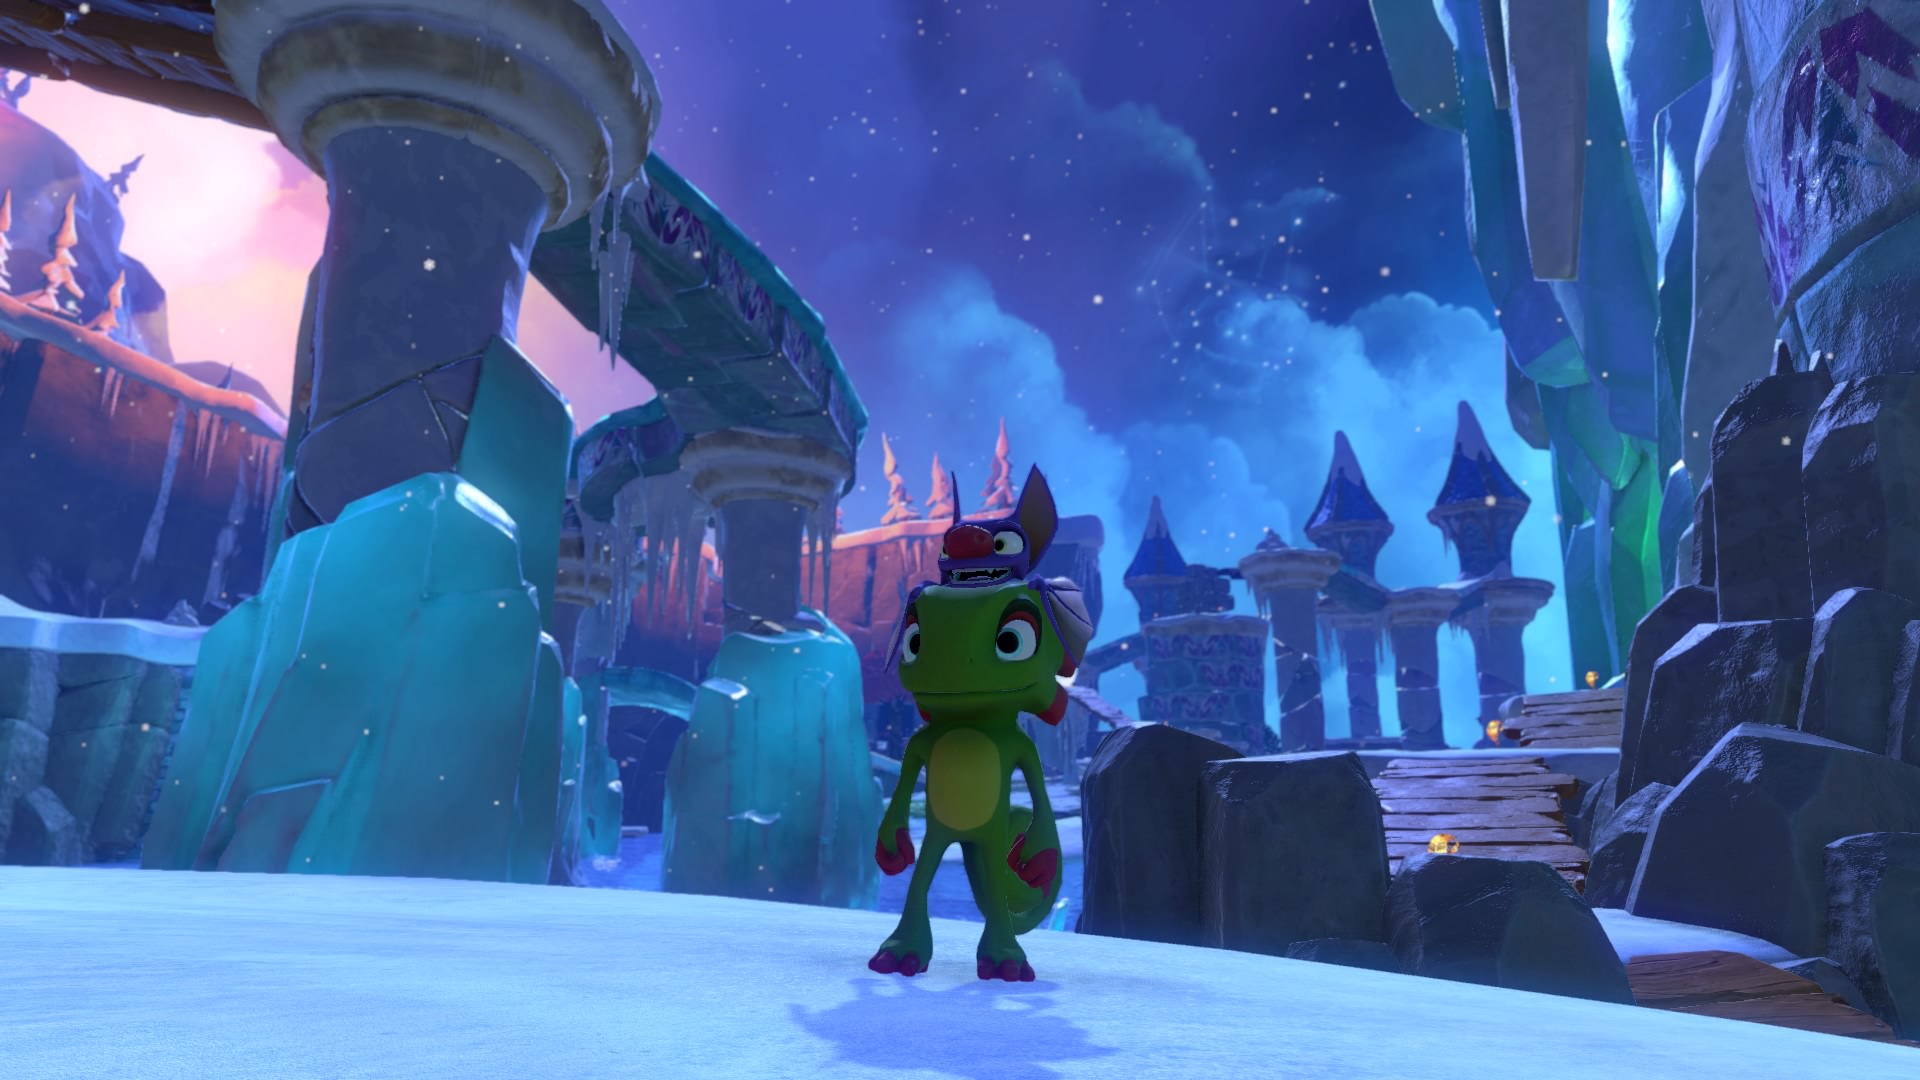 Yooka and Laylee stood against a starlit sky.